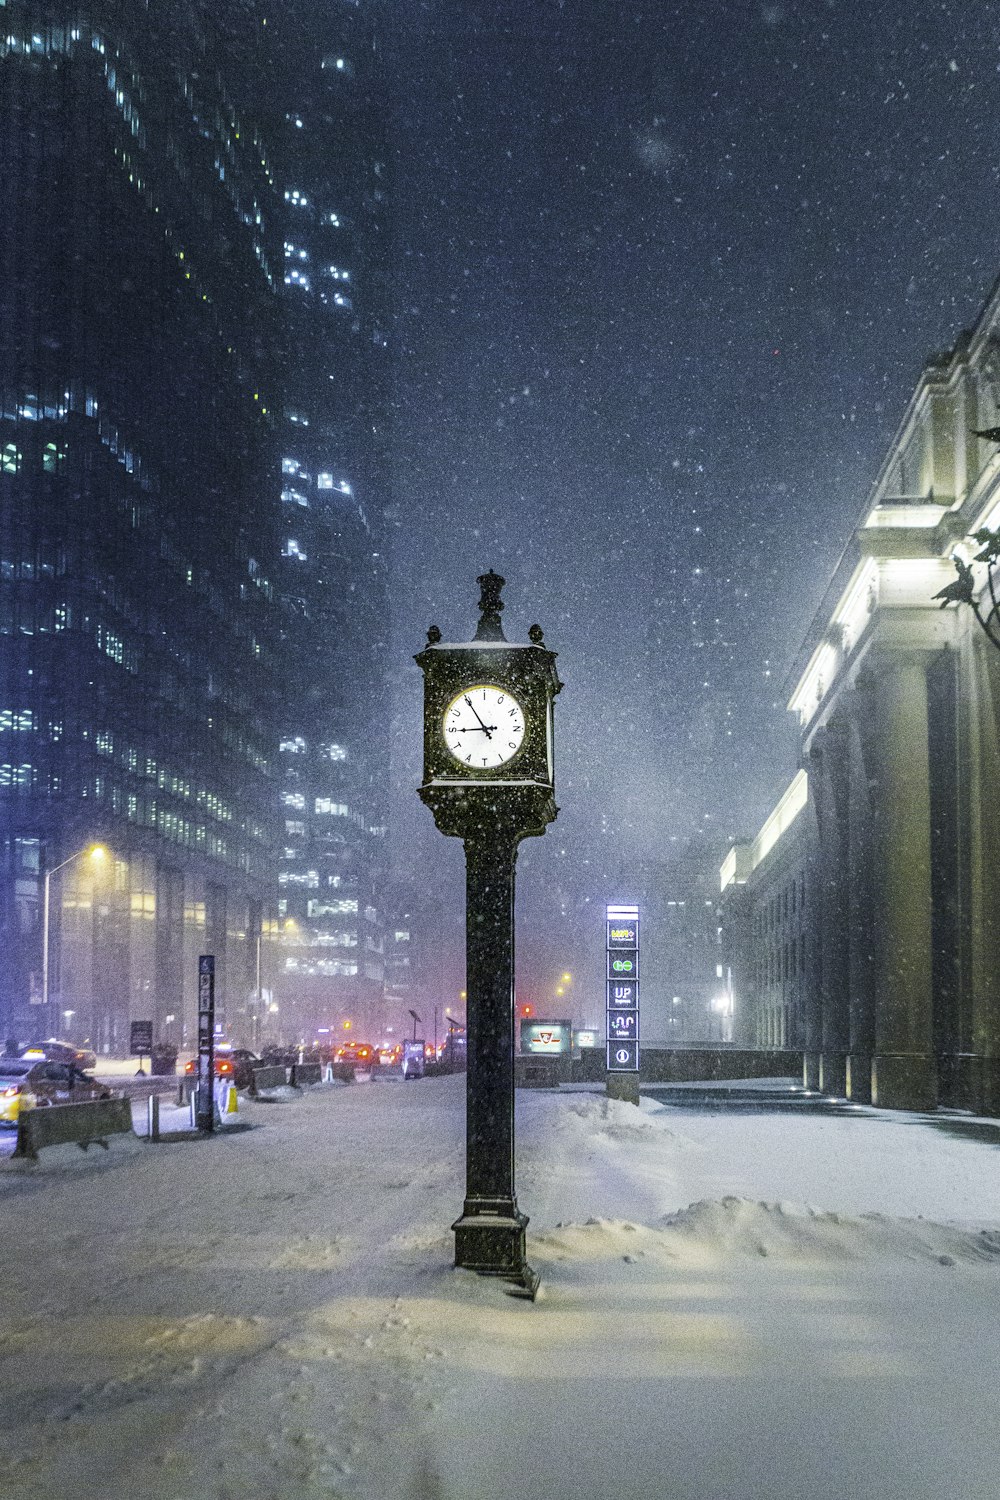 a clock in the middle of a snowy street